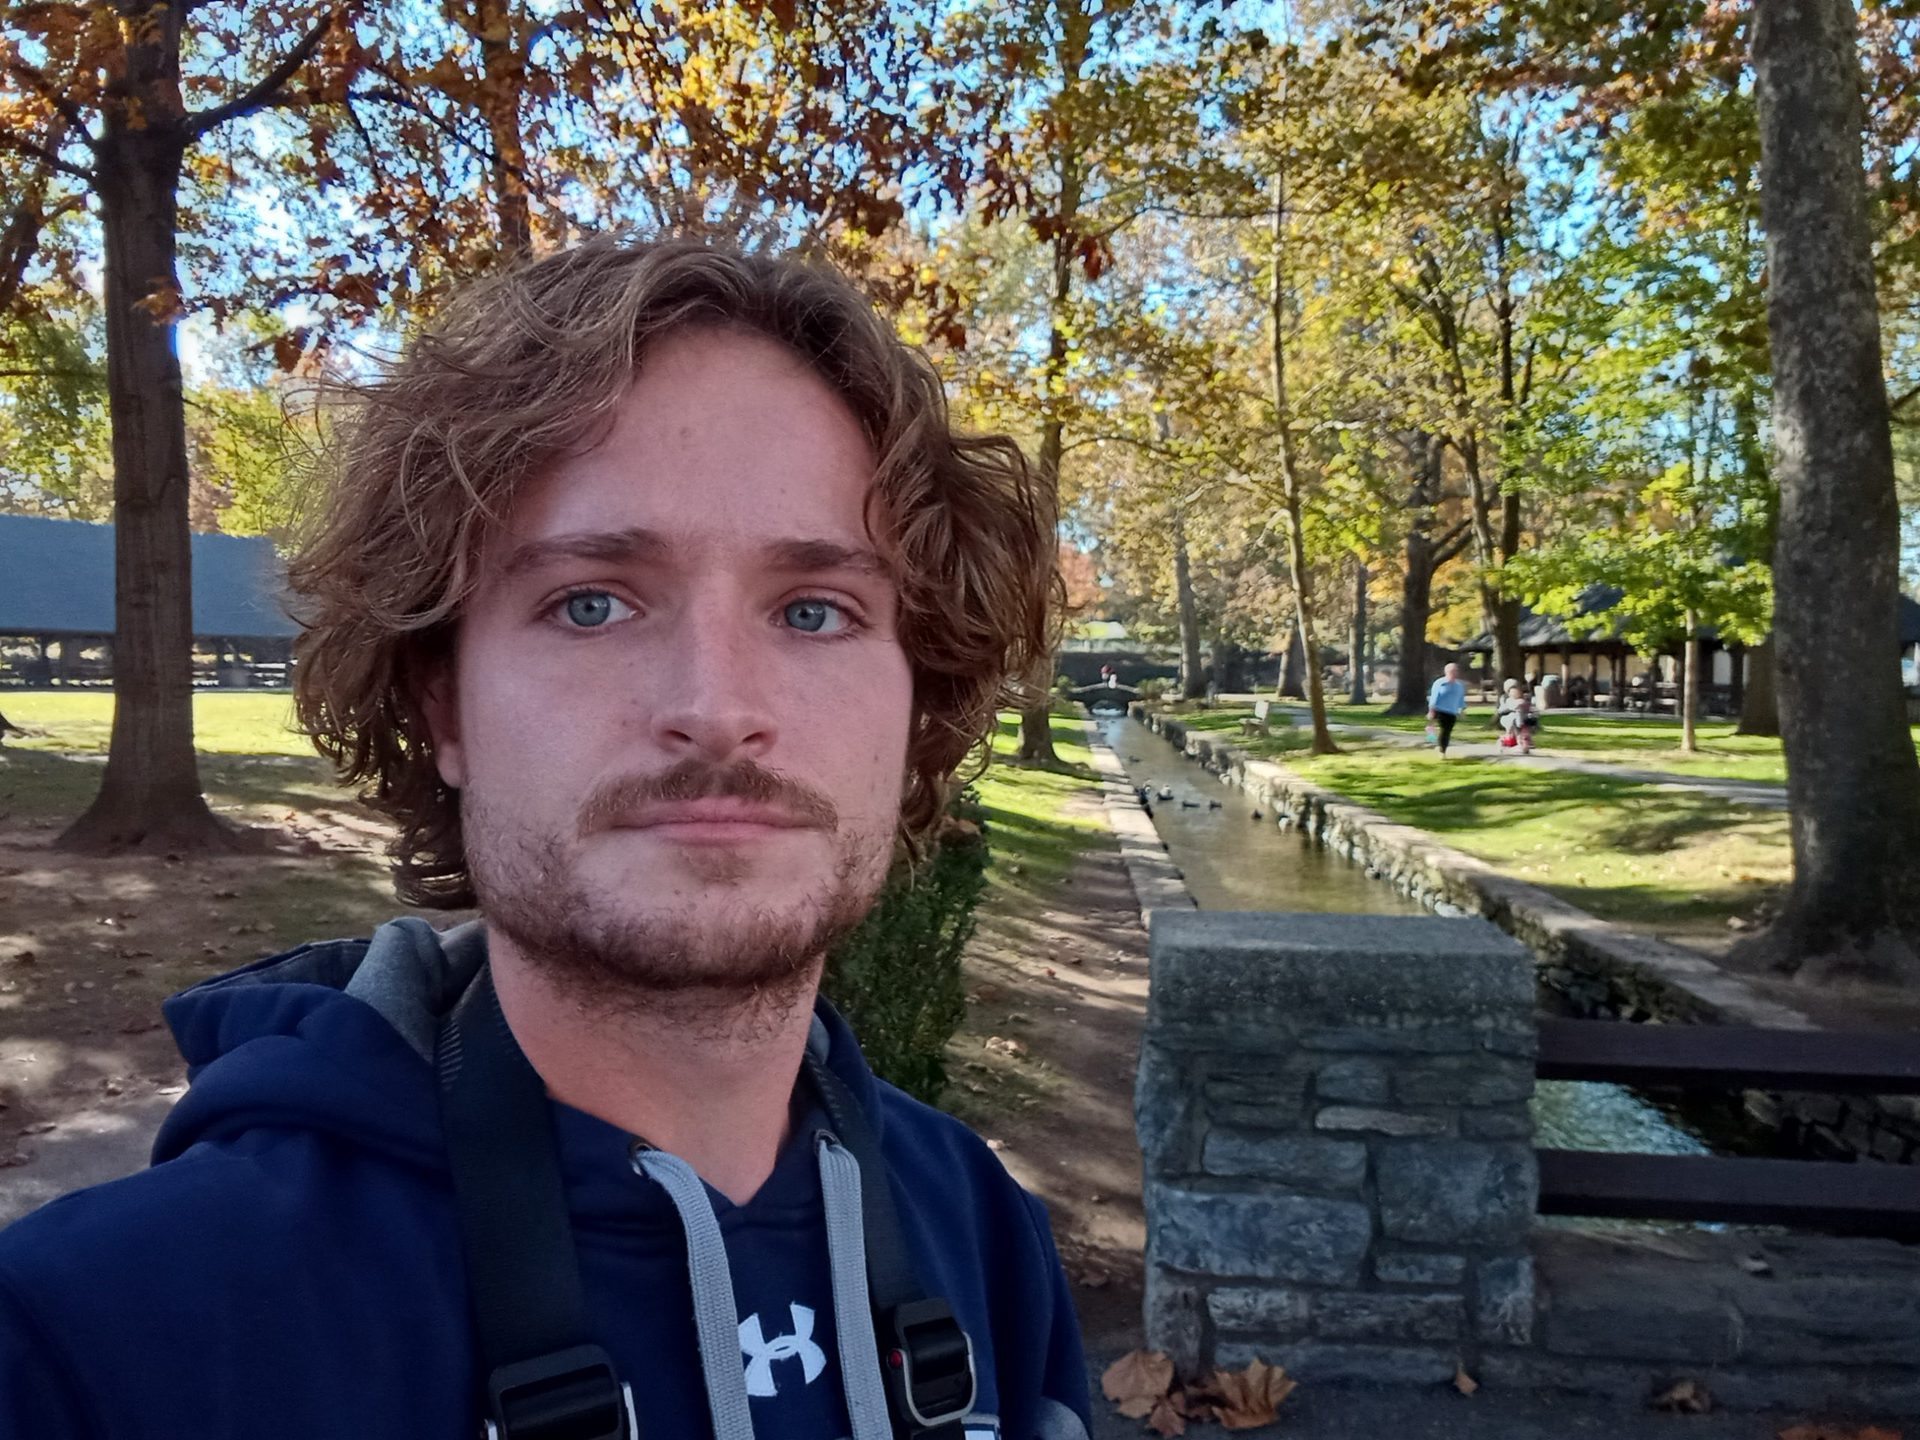 moto g pure standard selfie of a man with light curly hair and facial hair, wearing a t-shirt and hoodie, with trees behind him.